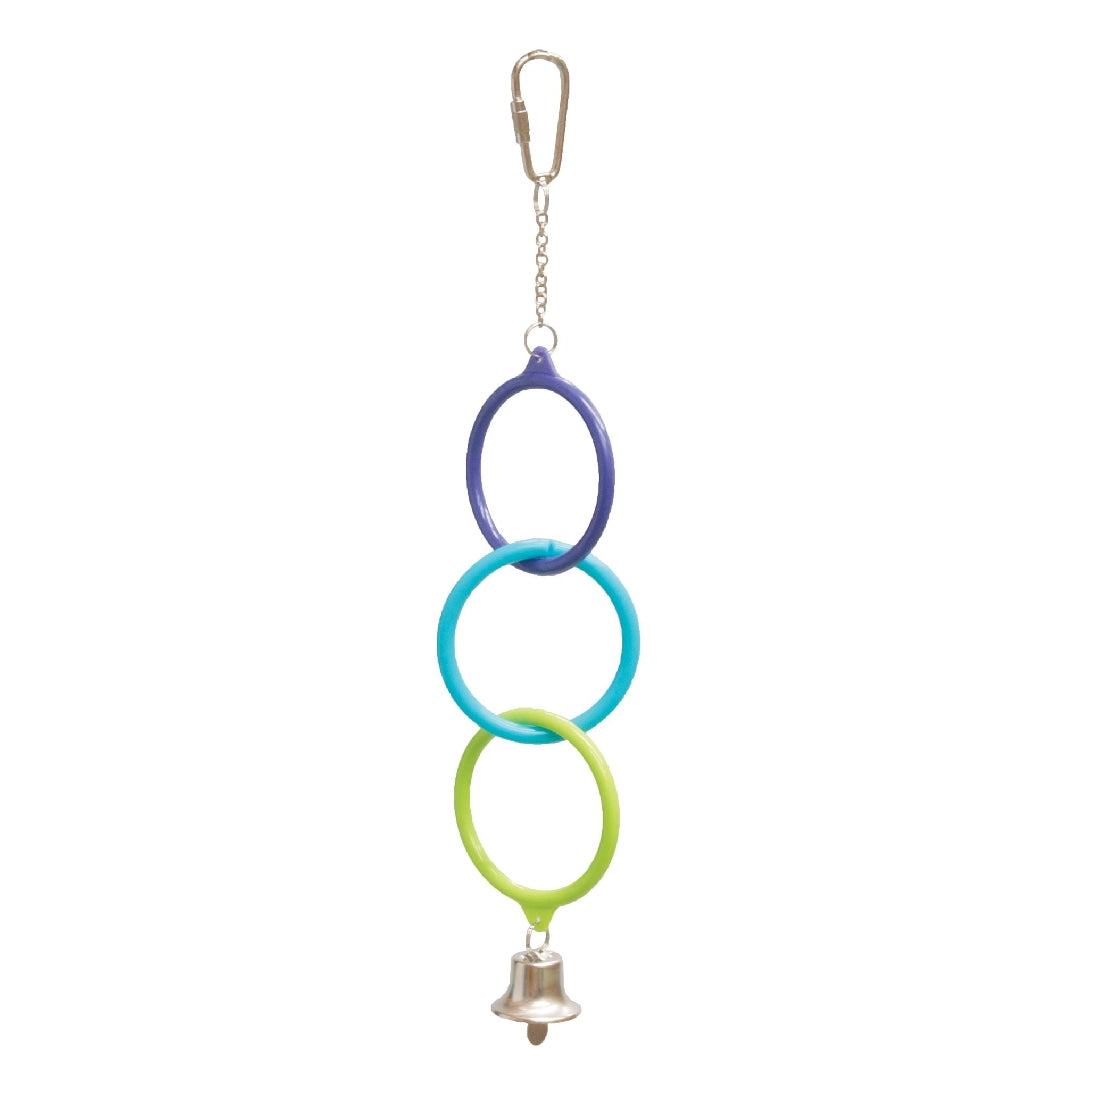 Alt: Colorful interlocking rings bird toy with bell on white background.